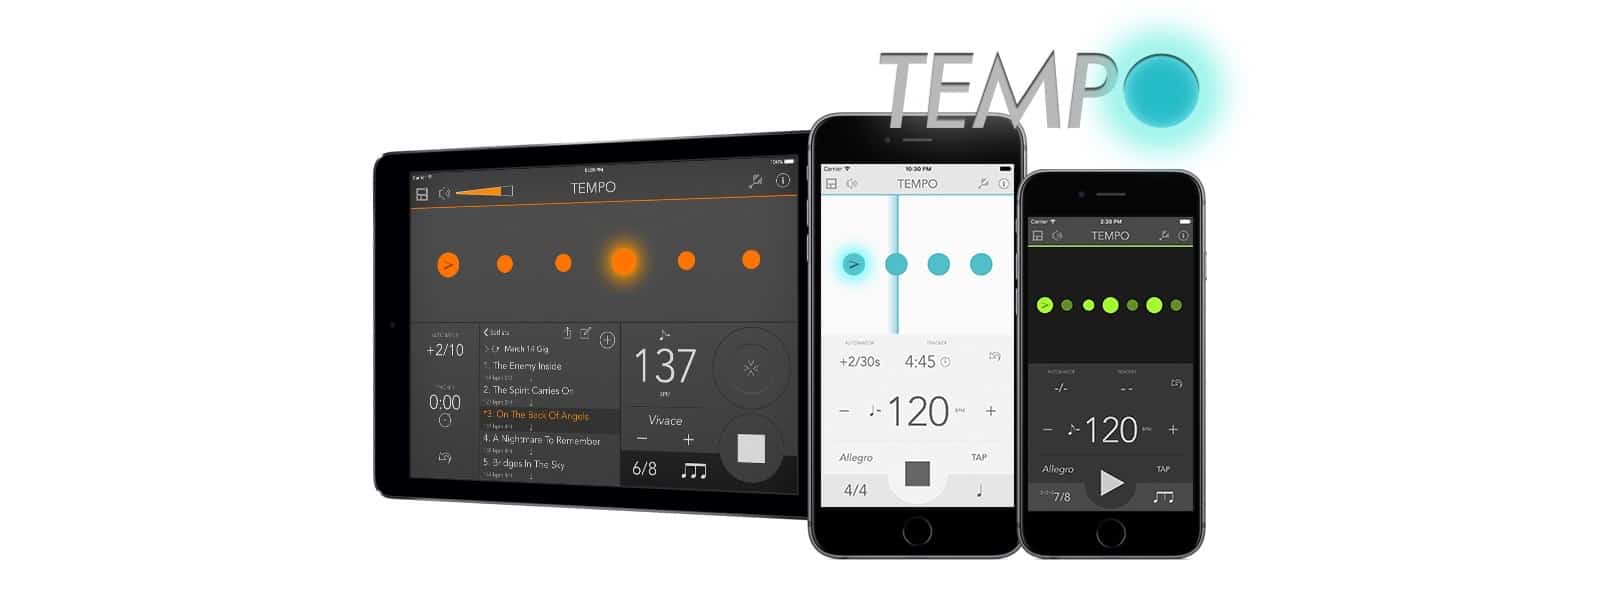 Tempo is so eassy that you'll want to use it all the time.